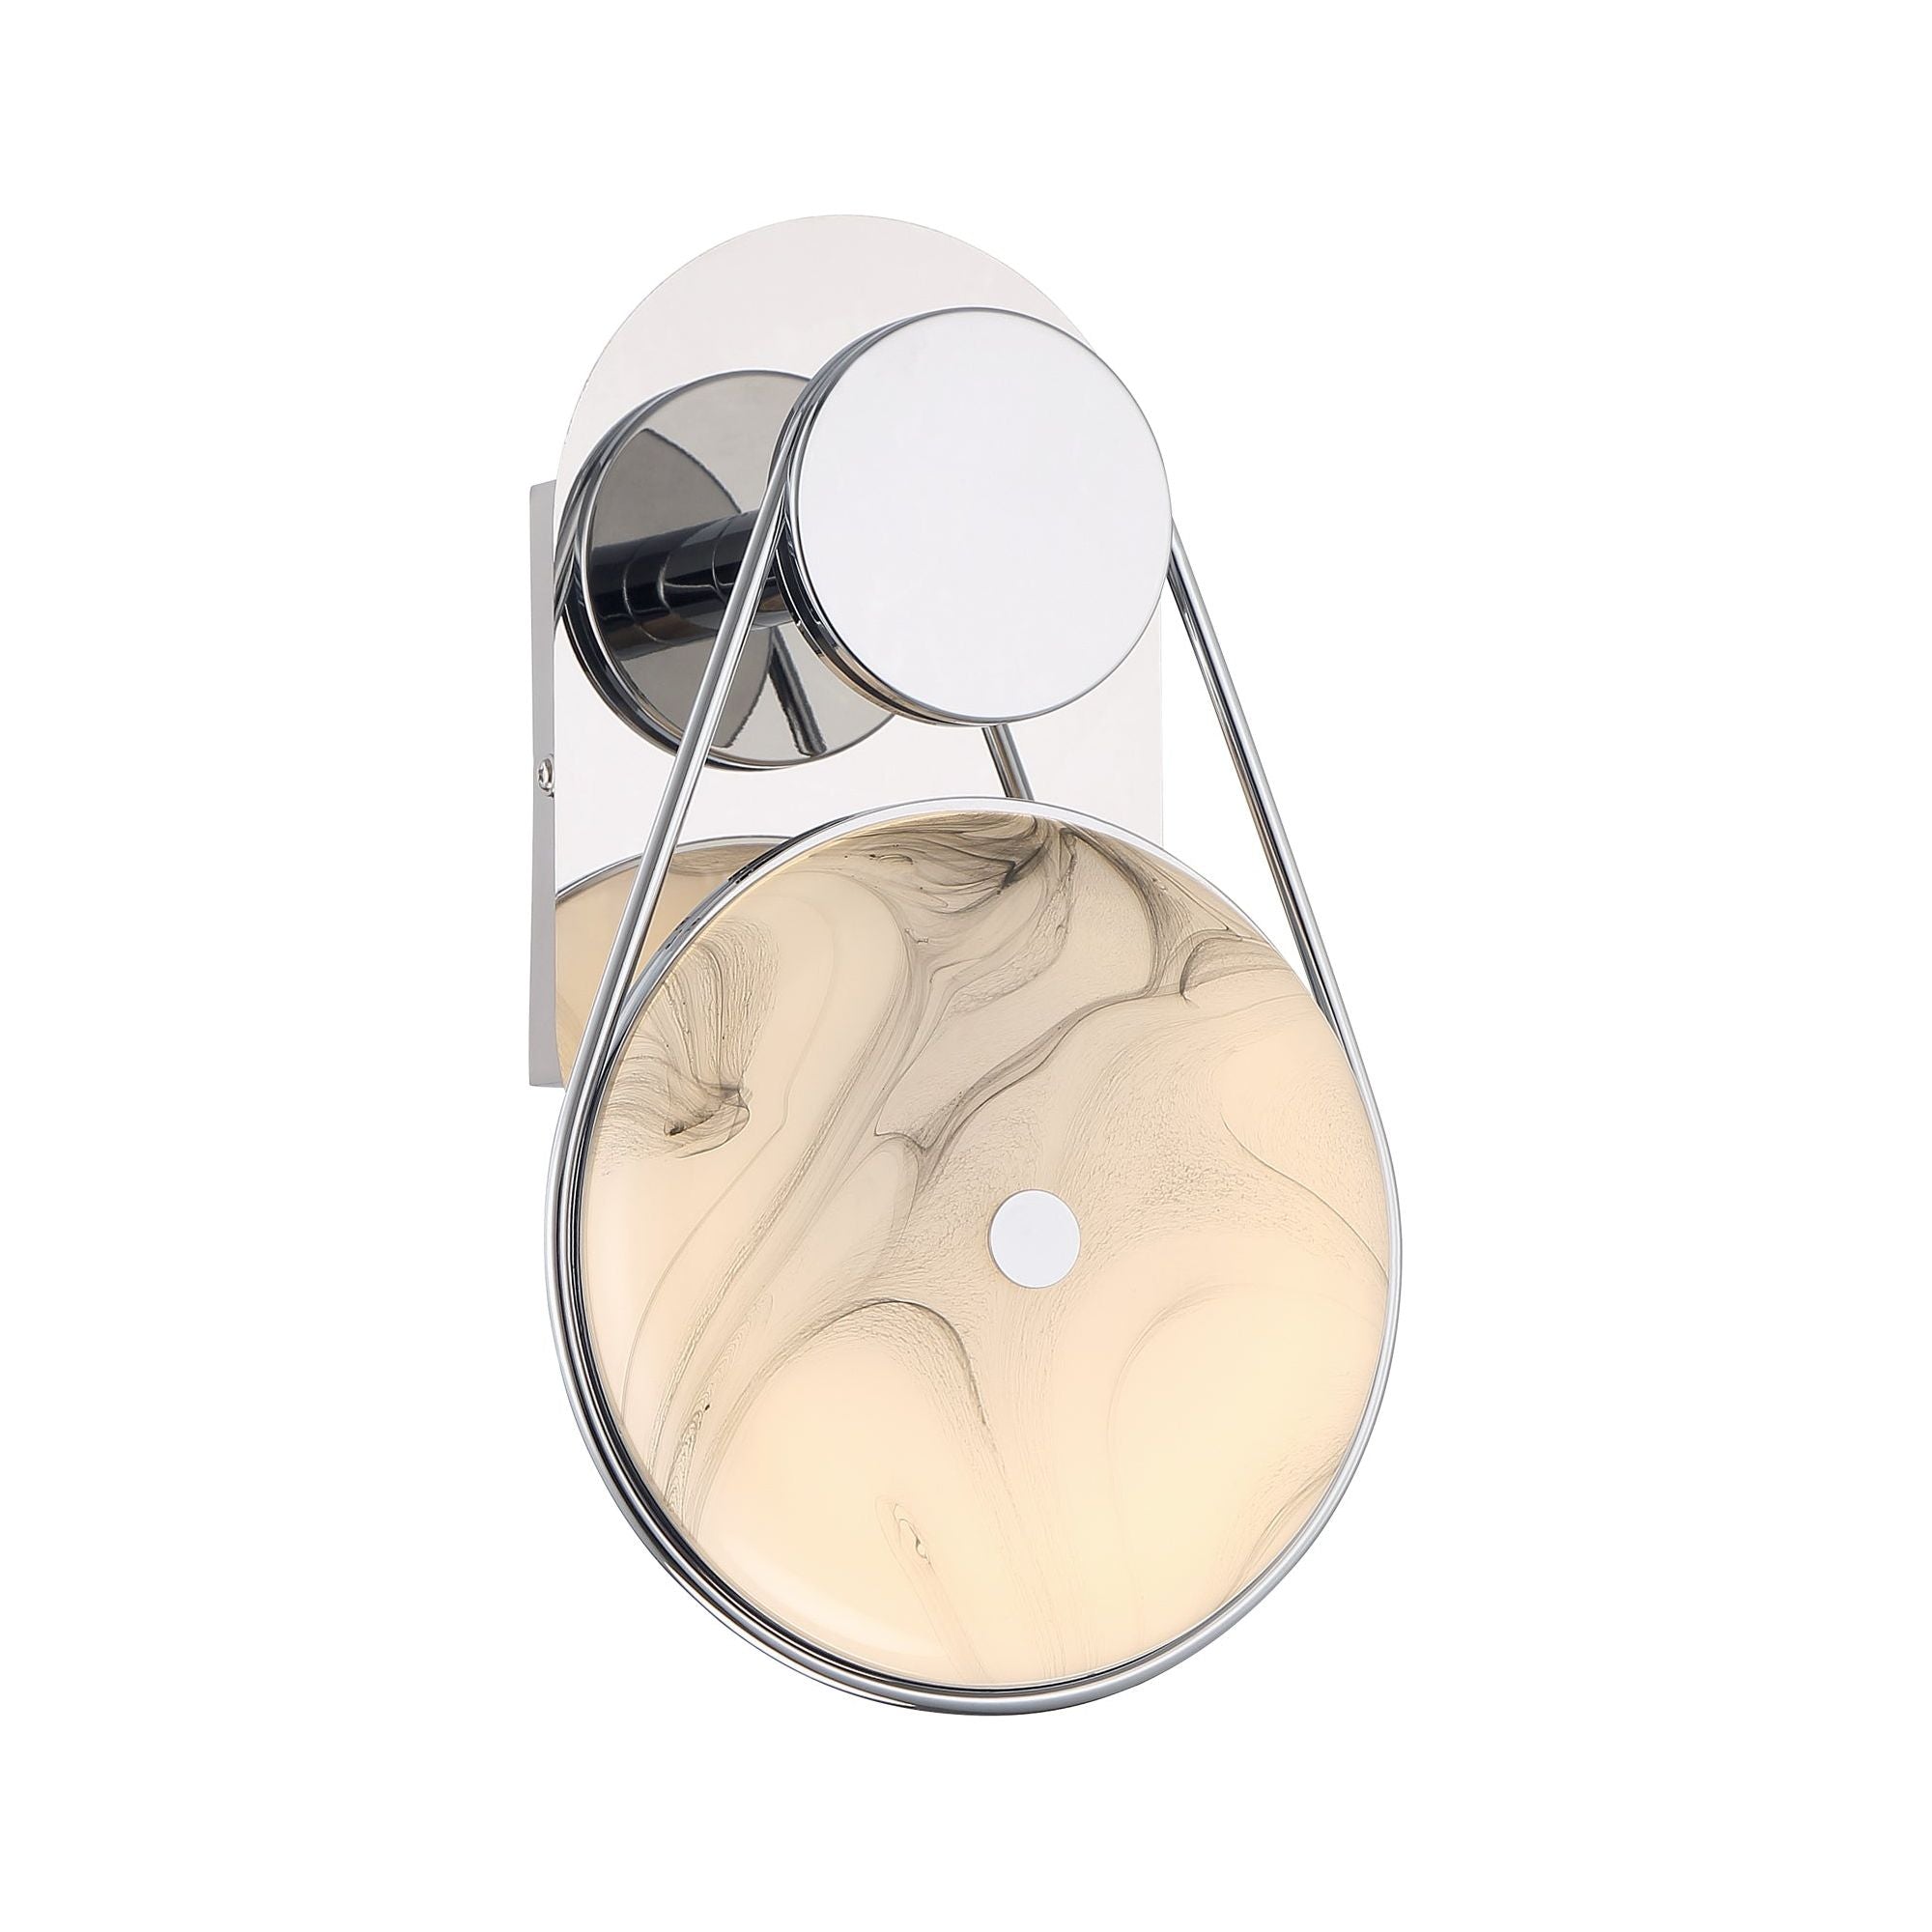 Disuco LED Wall Sconce